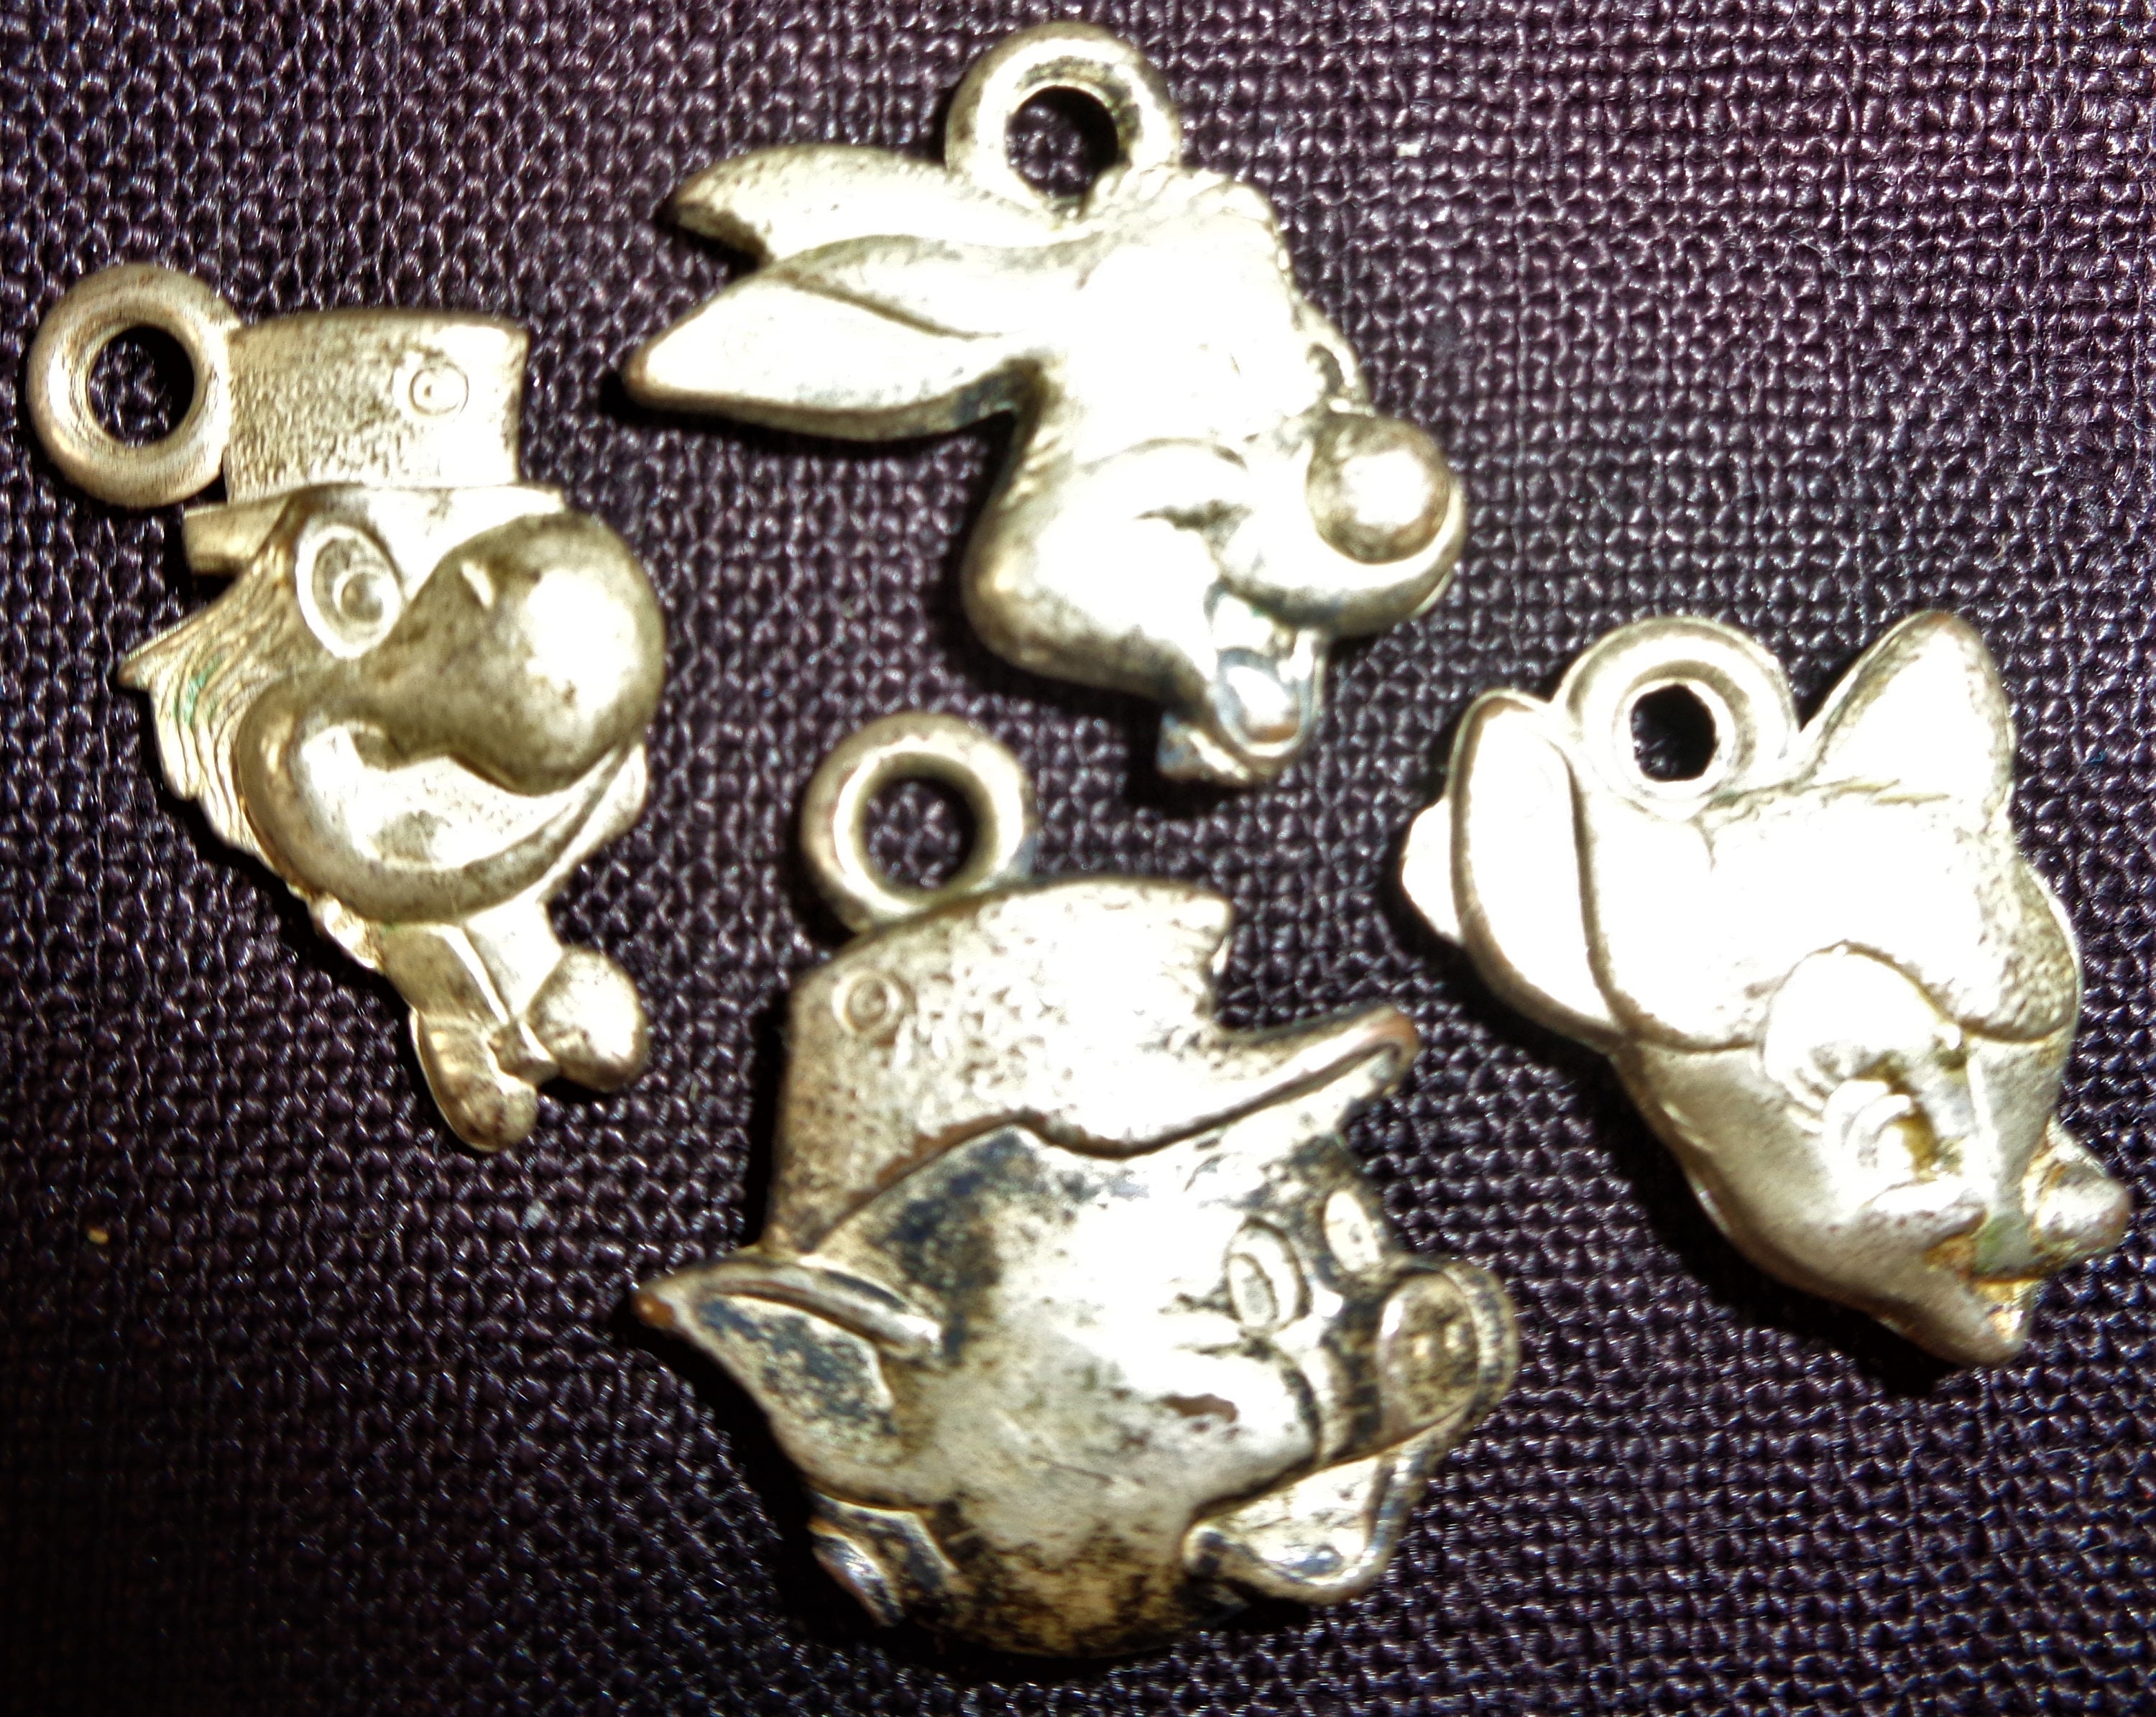 BixleyVintage Vintage Celluloid Cracker Jack Charms | Colorful Plastic Charms with Metal Loops | Pegasus, Rooster, Mickey Mouse, Gargoyle, & Song Bird 1